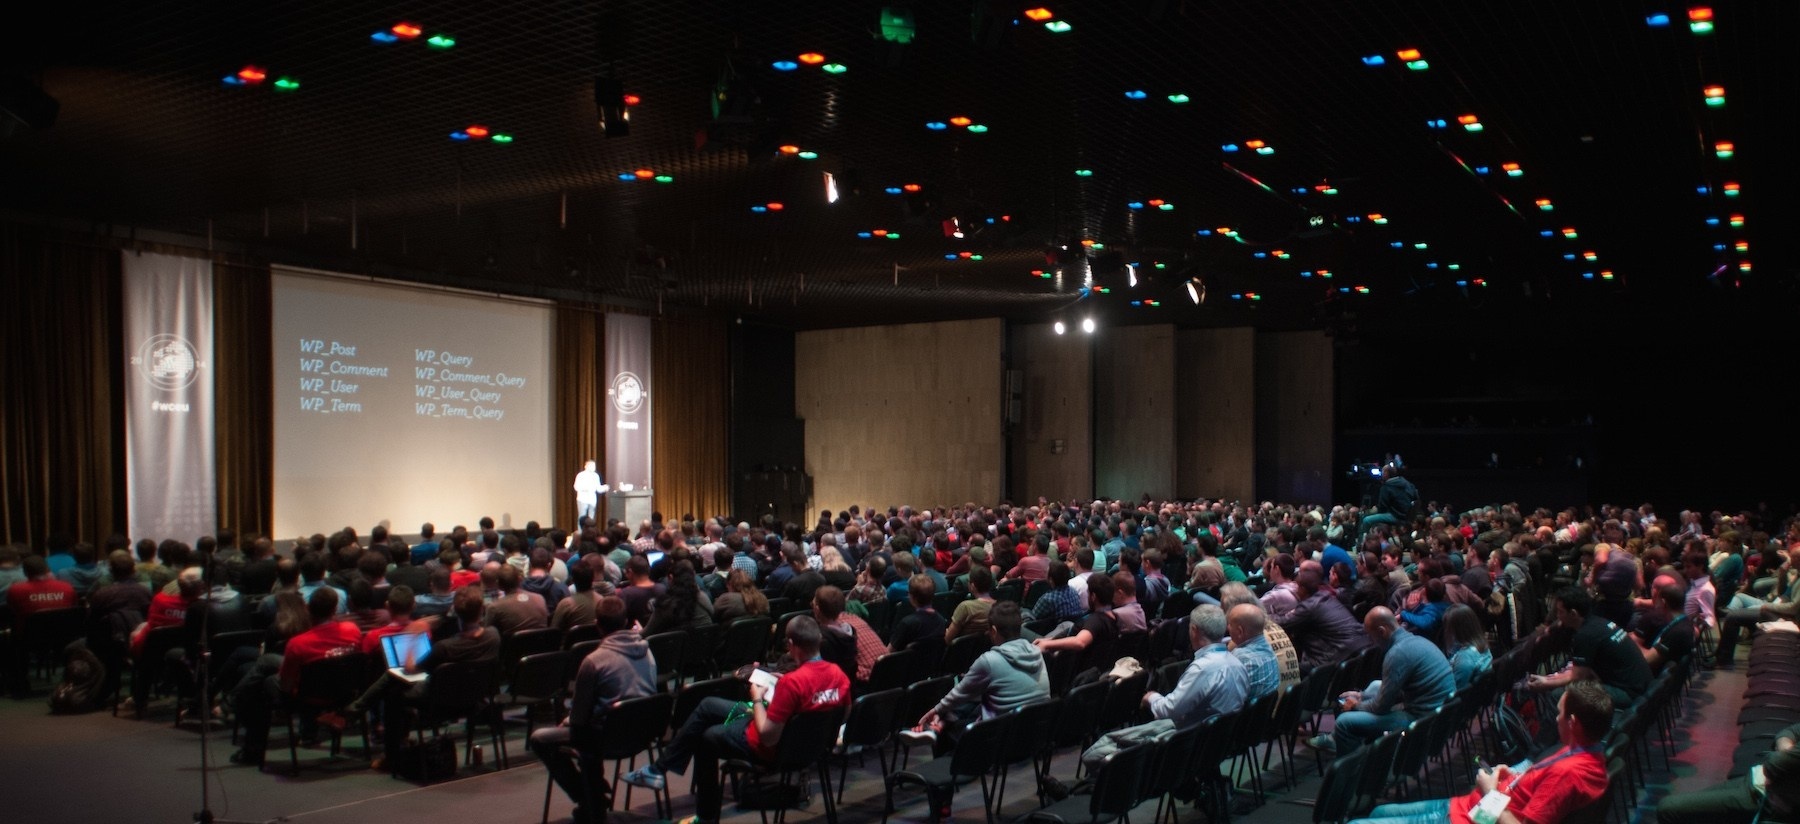 WordCamp Europe 2014 in Bulgaria with 900+ participants in 4 continents.